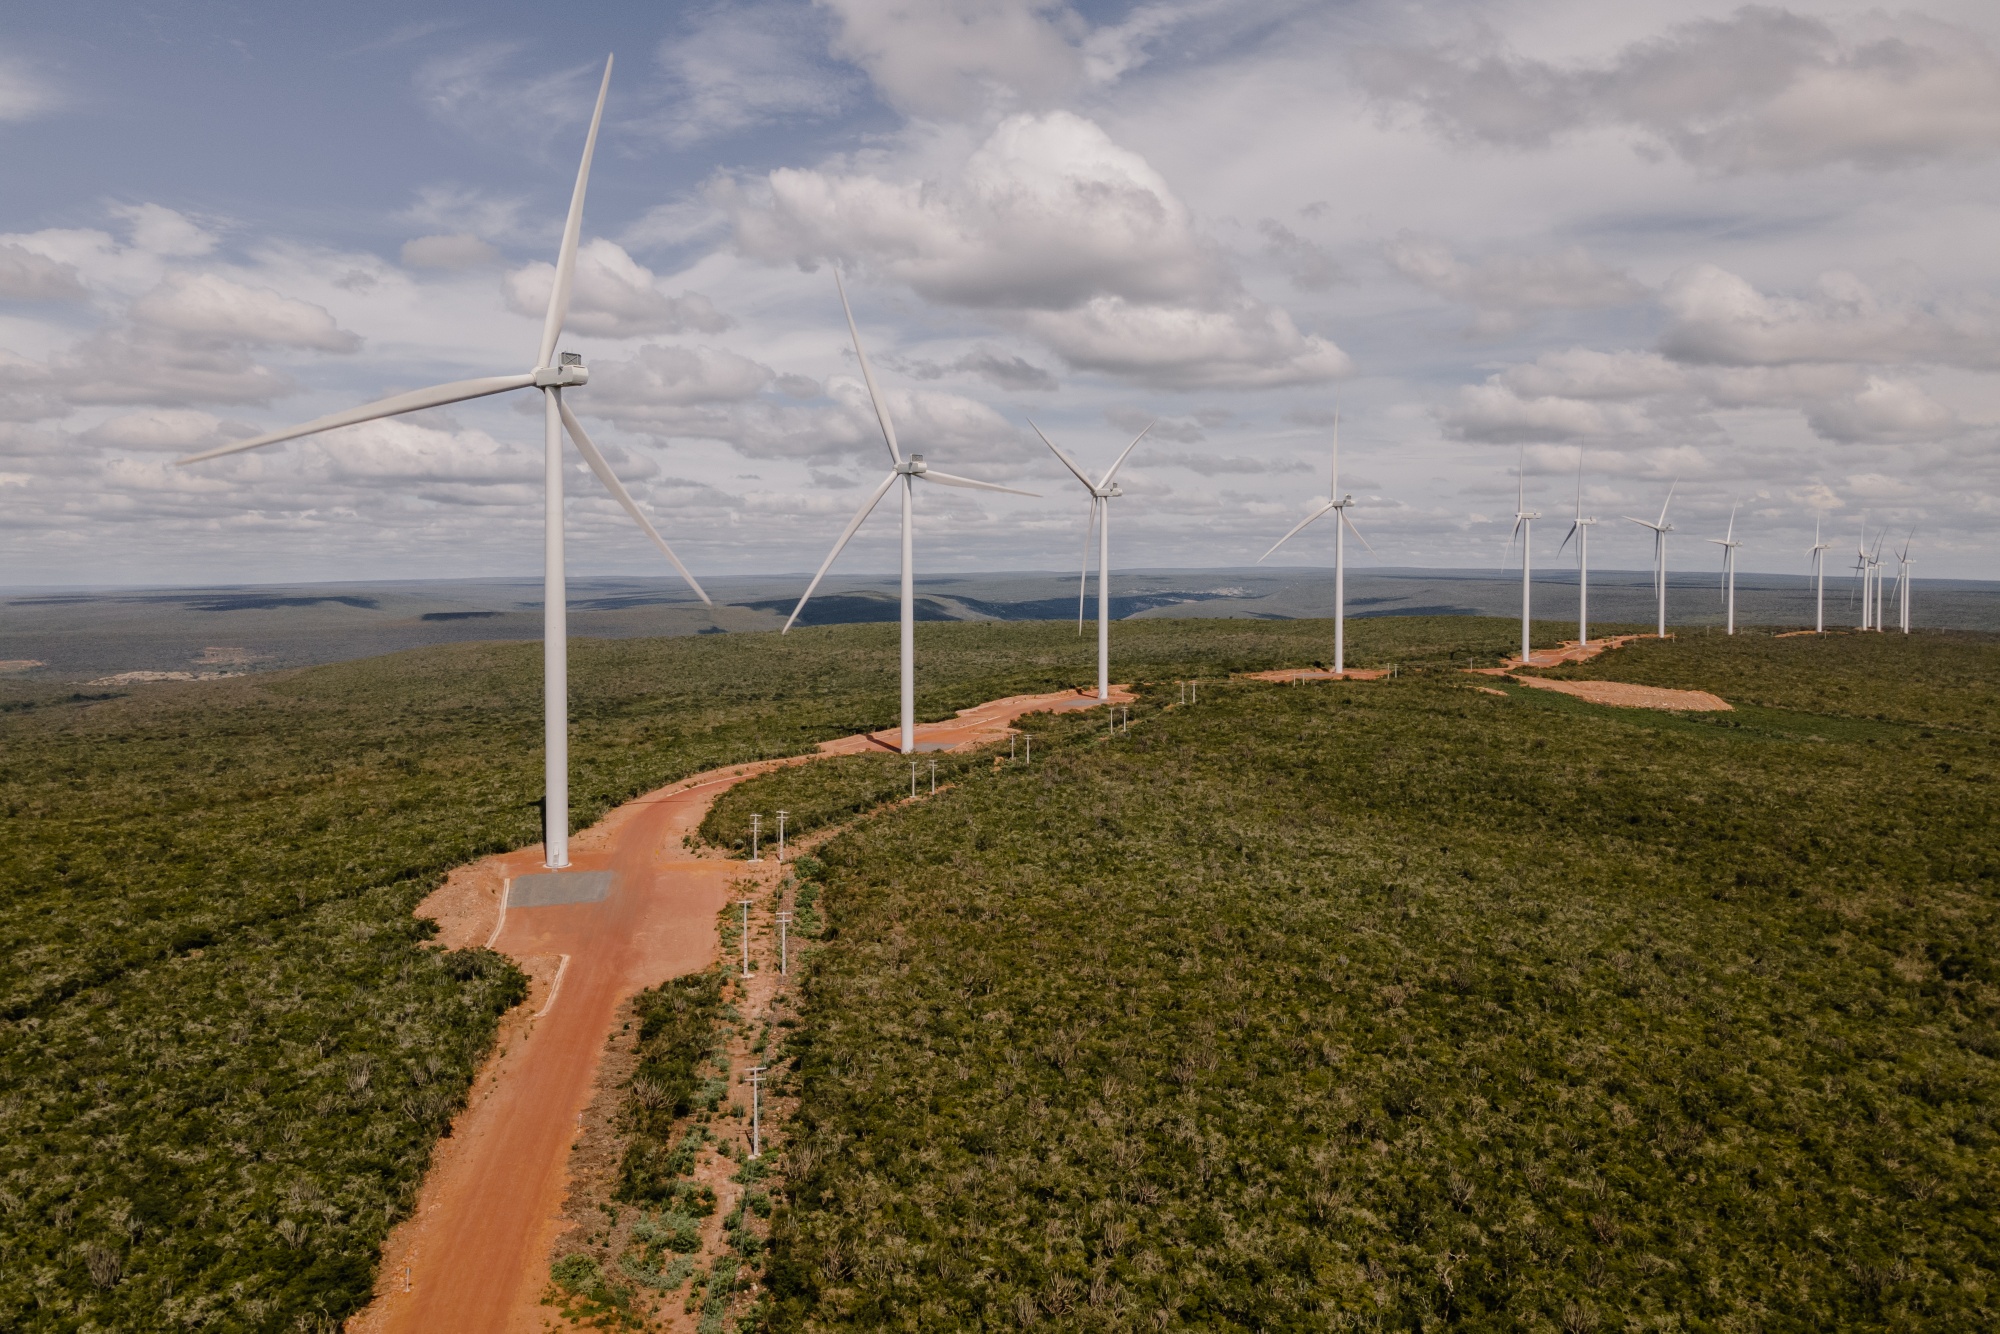 Brazil Aims For Green Hydrogen Market Fueled By Wind Energy - Bloomberg